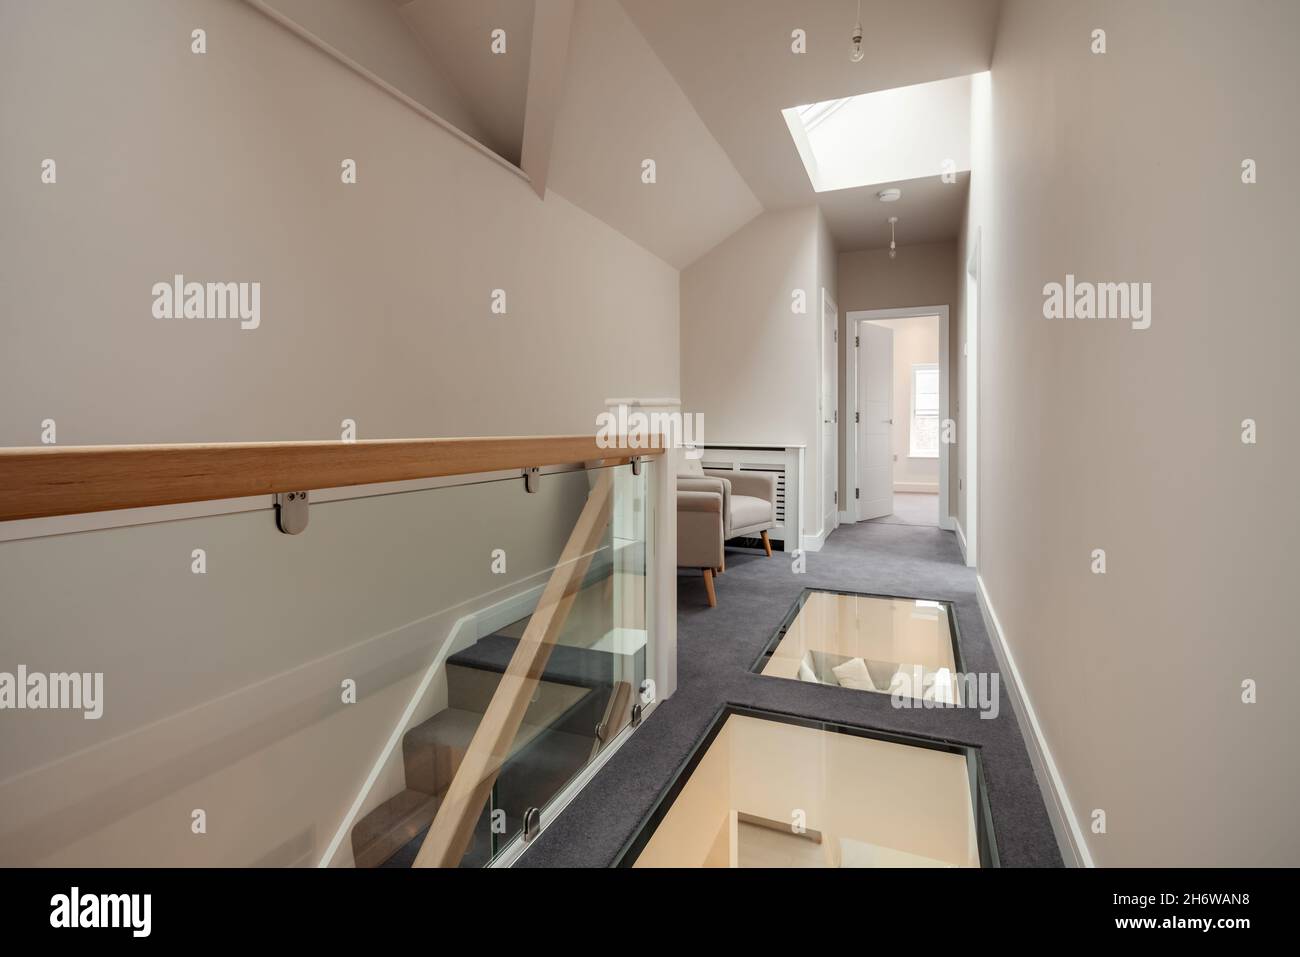 Cambridge, England - August 16 2019: Modern first floor landing area in renovated vacant house with seating area and unusual glass floor Stock Photo